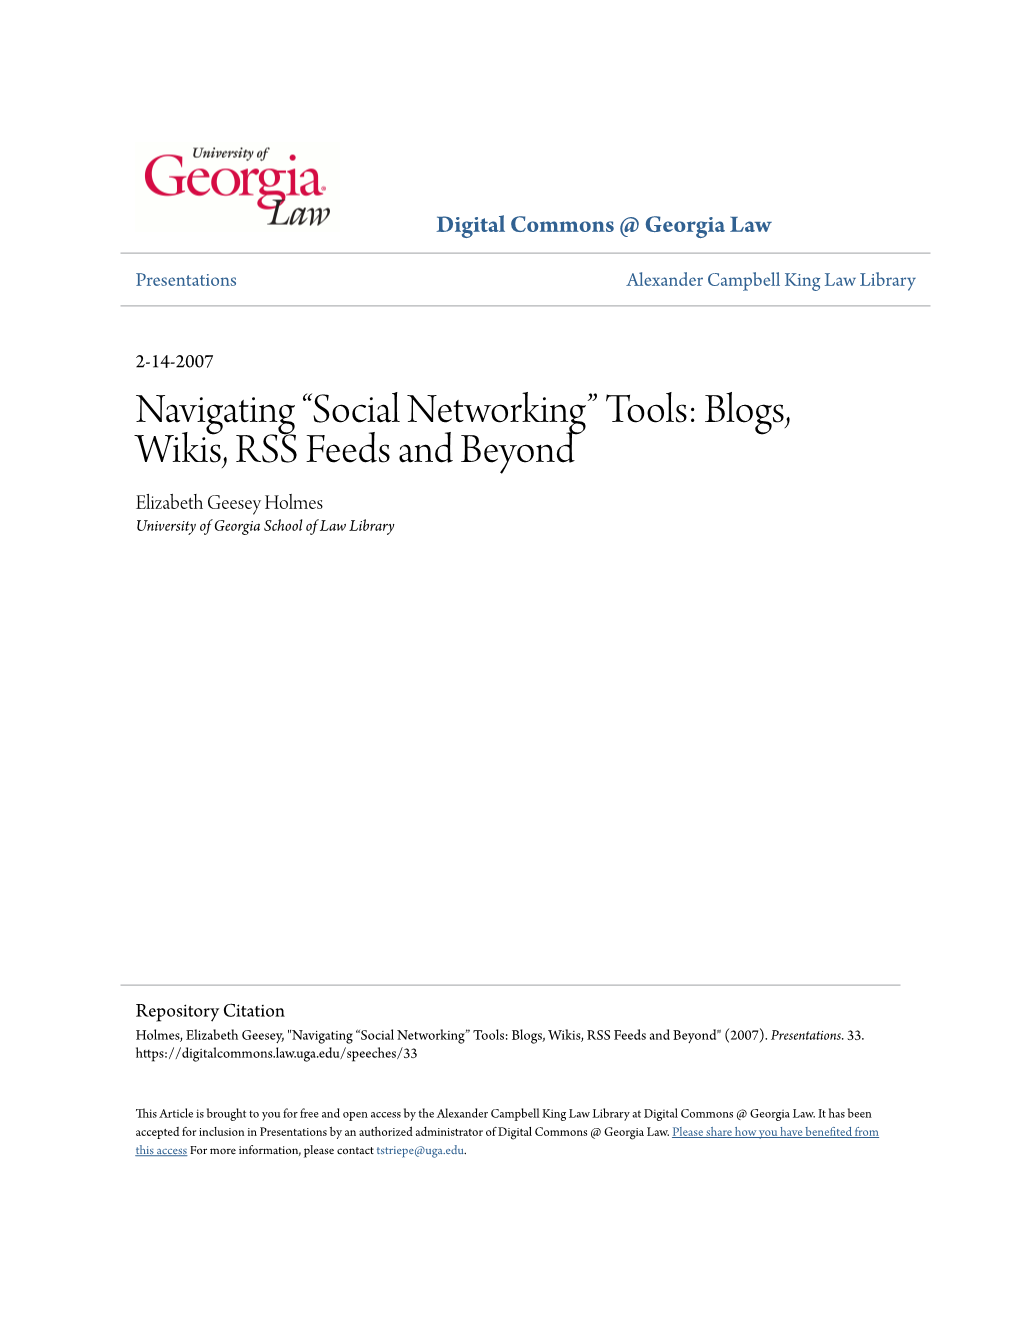 Blogs, Wikis, RSS Feeds and Beyond Elizabeth Geesey Holmes University of Georgia School of Law Library